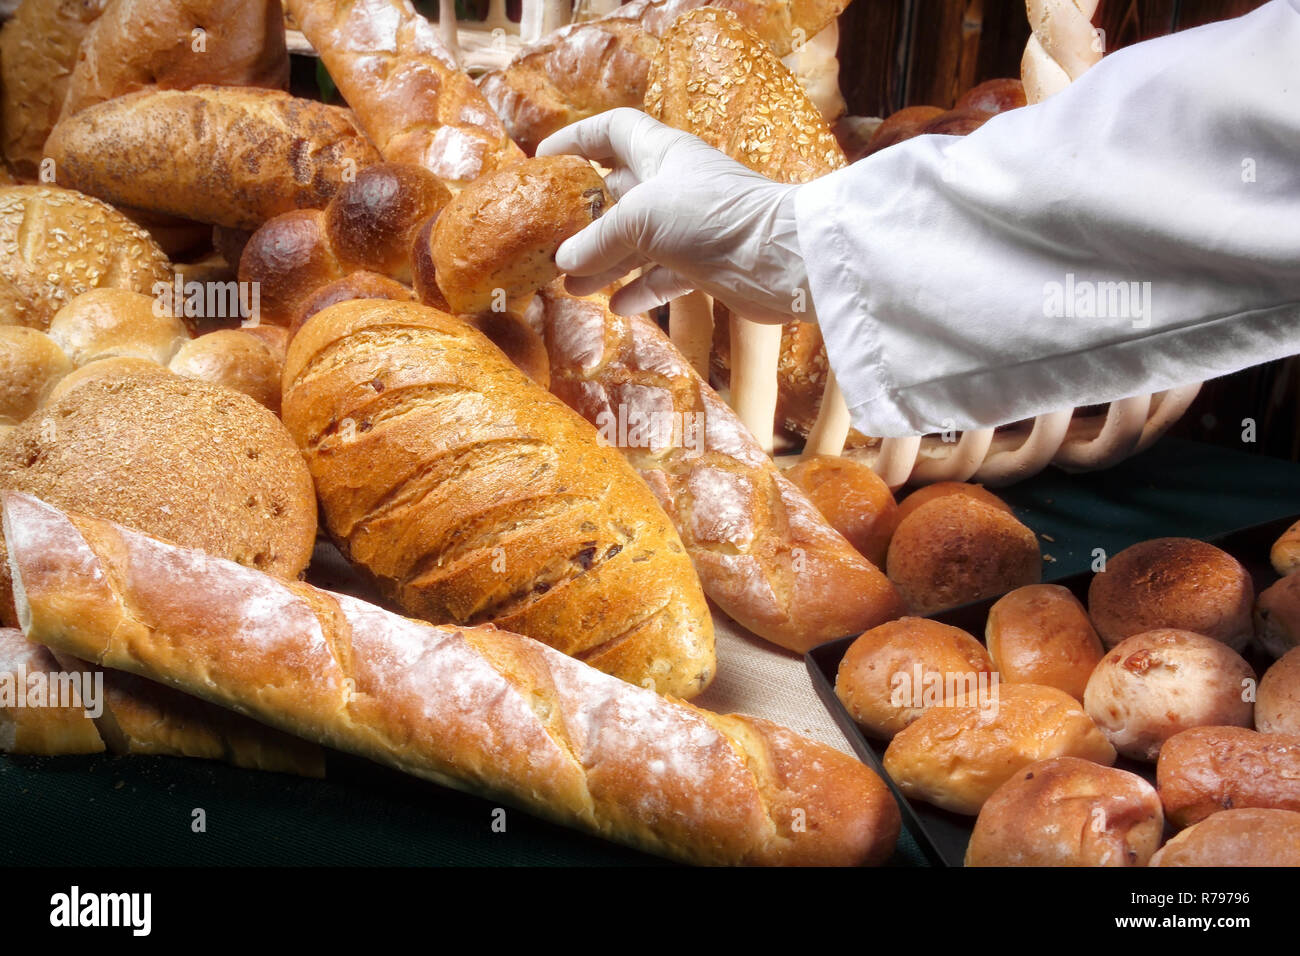 variety of breads and chief Stock Photo